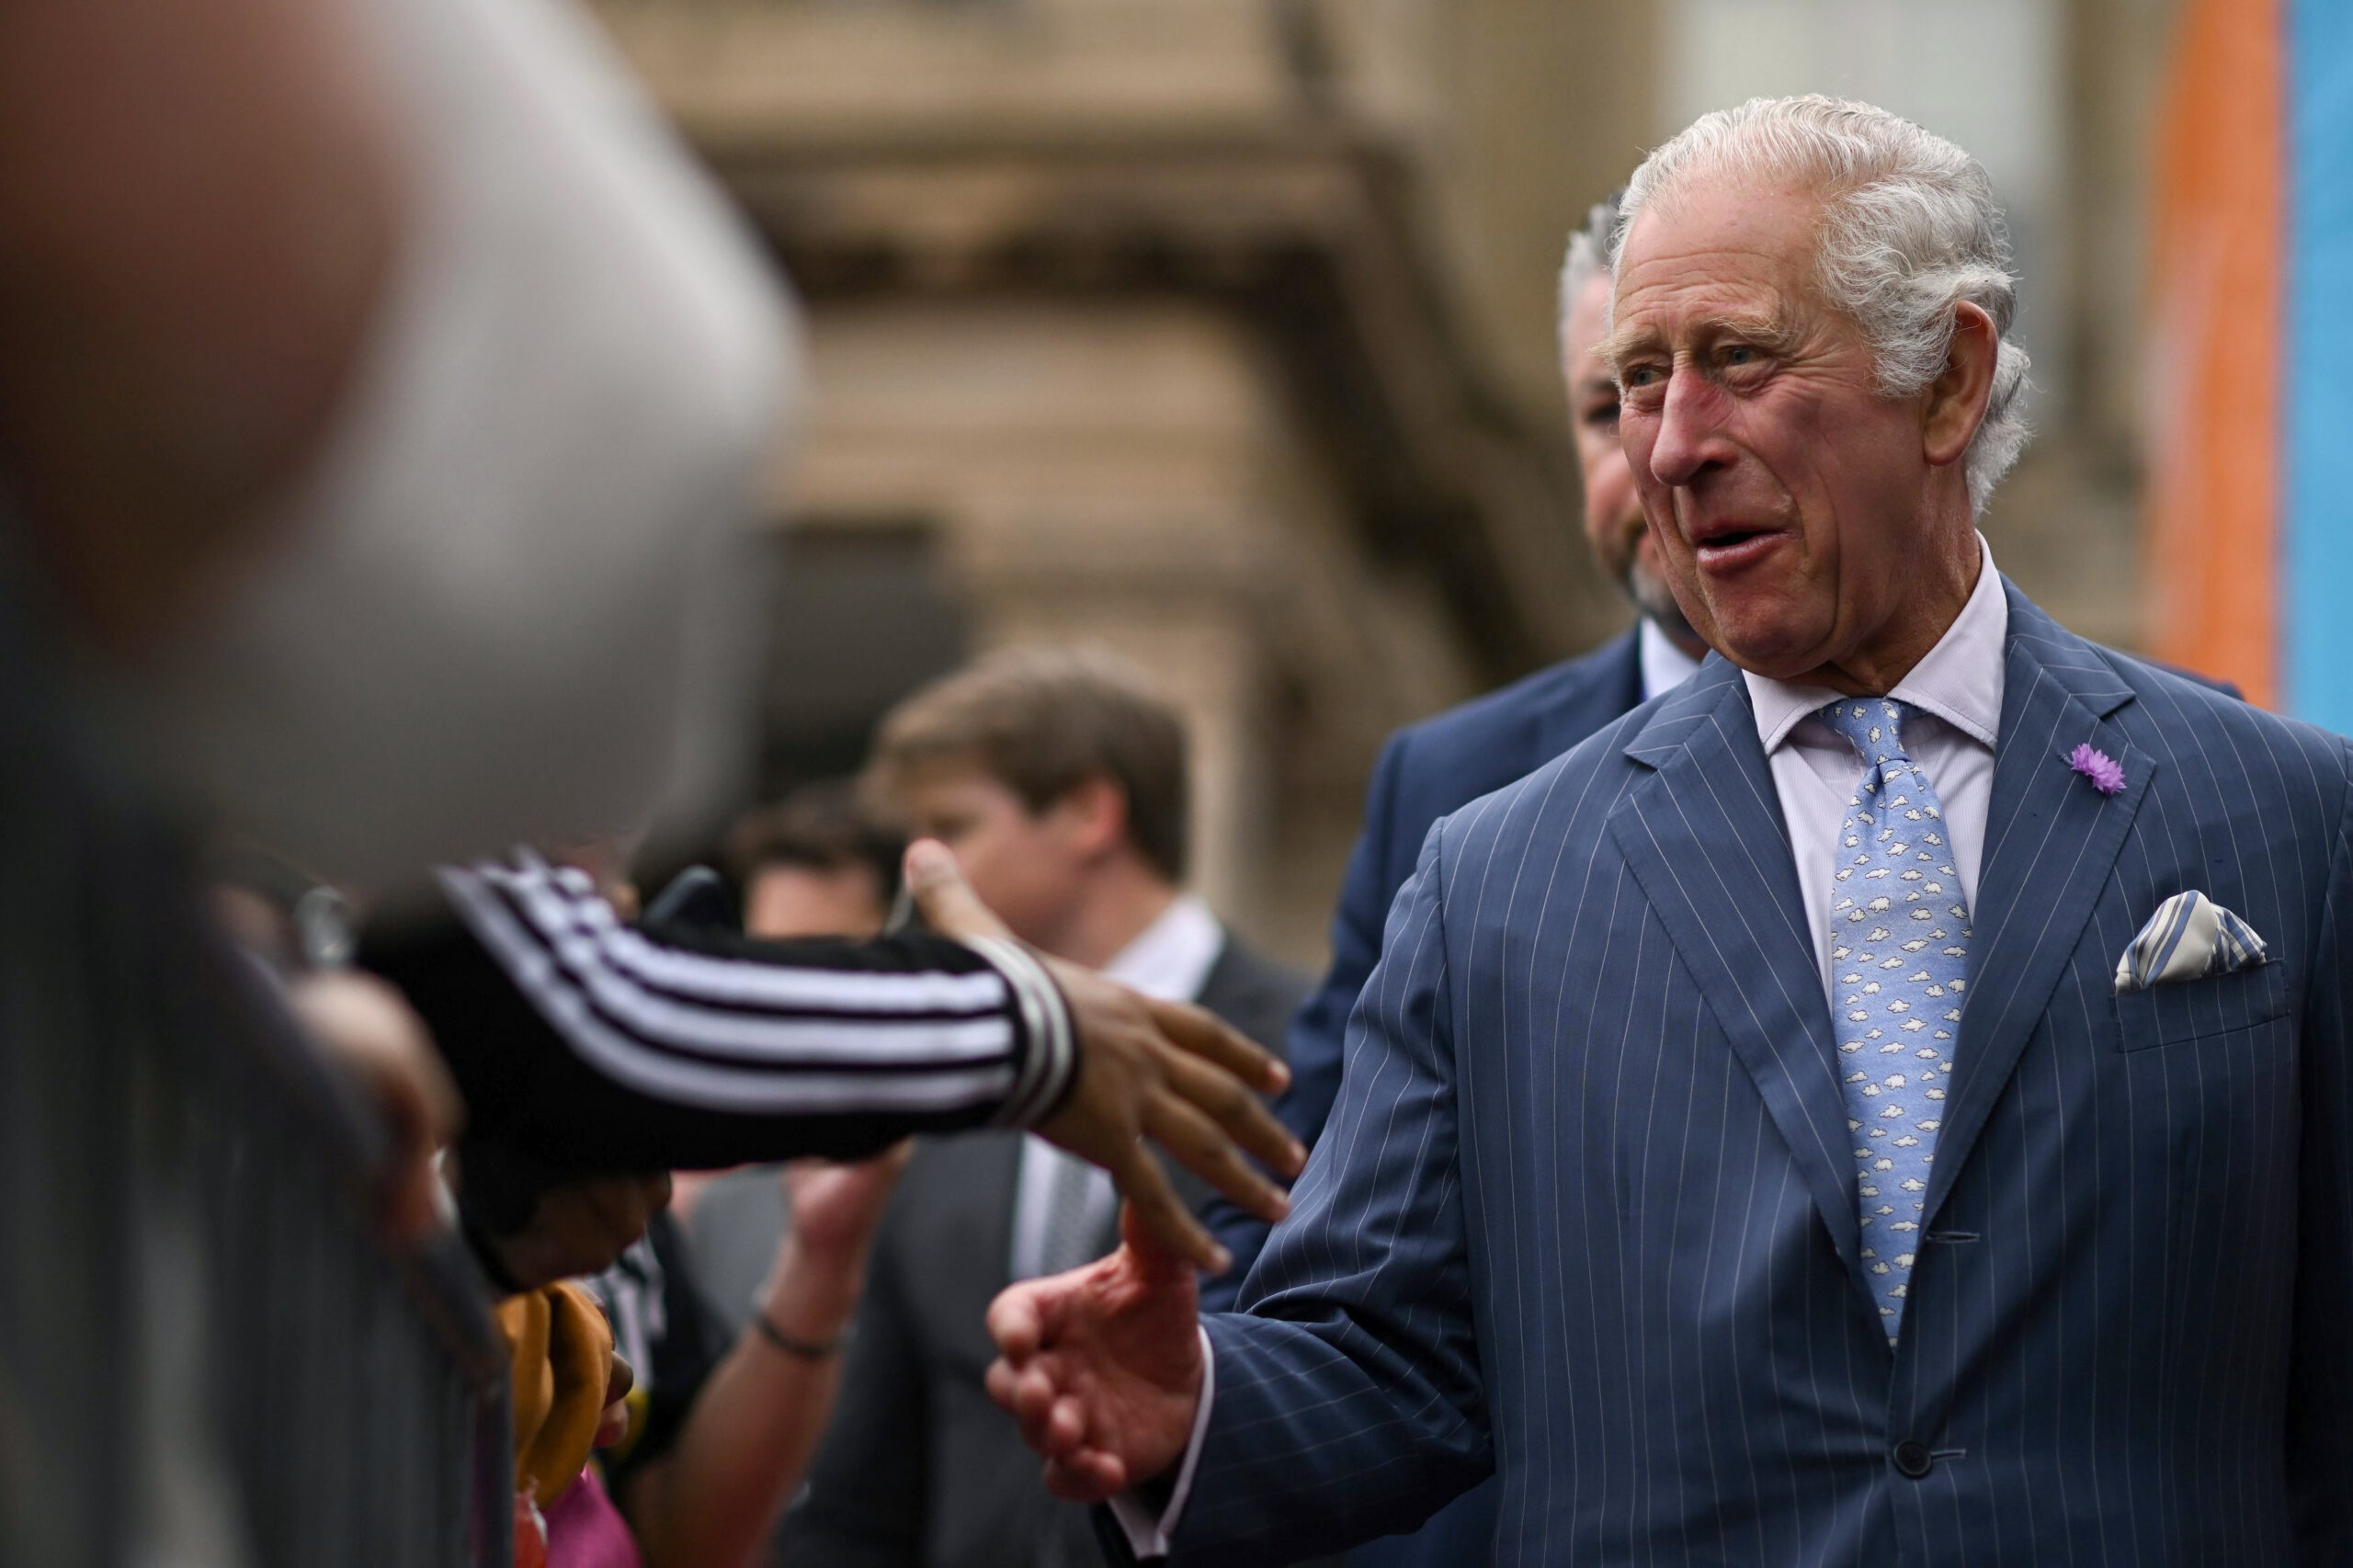 FILE - Britain's Prince Charles visits the Festival Site at Victoria Square before the opening ceremony of the Commonwealth Games, in Birmingham, England, Thursday July 28, 2022. Britain’s Prince Charles is facing more questions over his charities after a newspaper reported that one of his funds accepted a 1 million-pound ($1.2 million) donation from relatives of Osama bin Laden. The Sunday Times reported that the Prince of Wales’s Charitable Fund received the money in 2013 from Bakr bin Laden and his brother Shafiq. (Ben Stansall/Pool photo via AP, File)